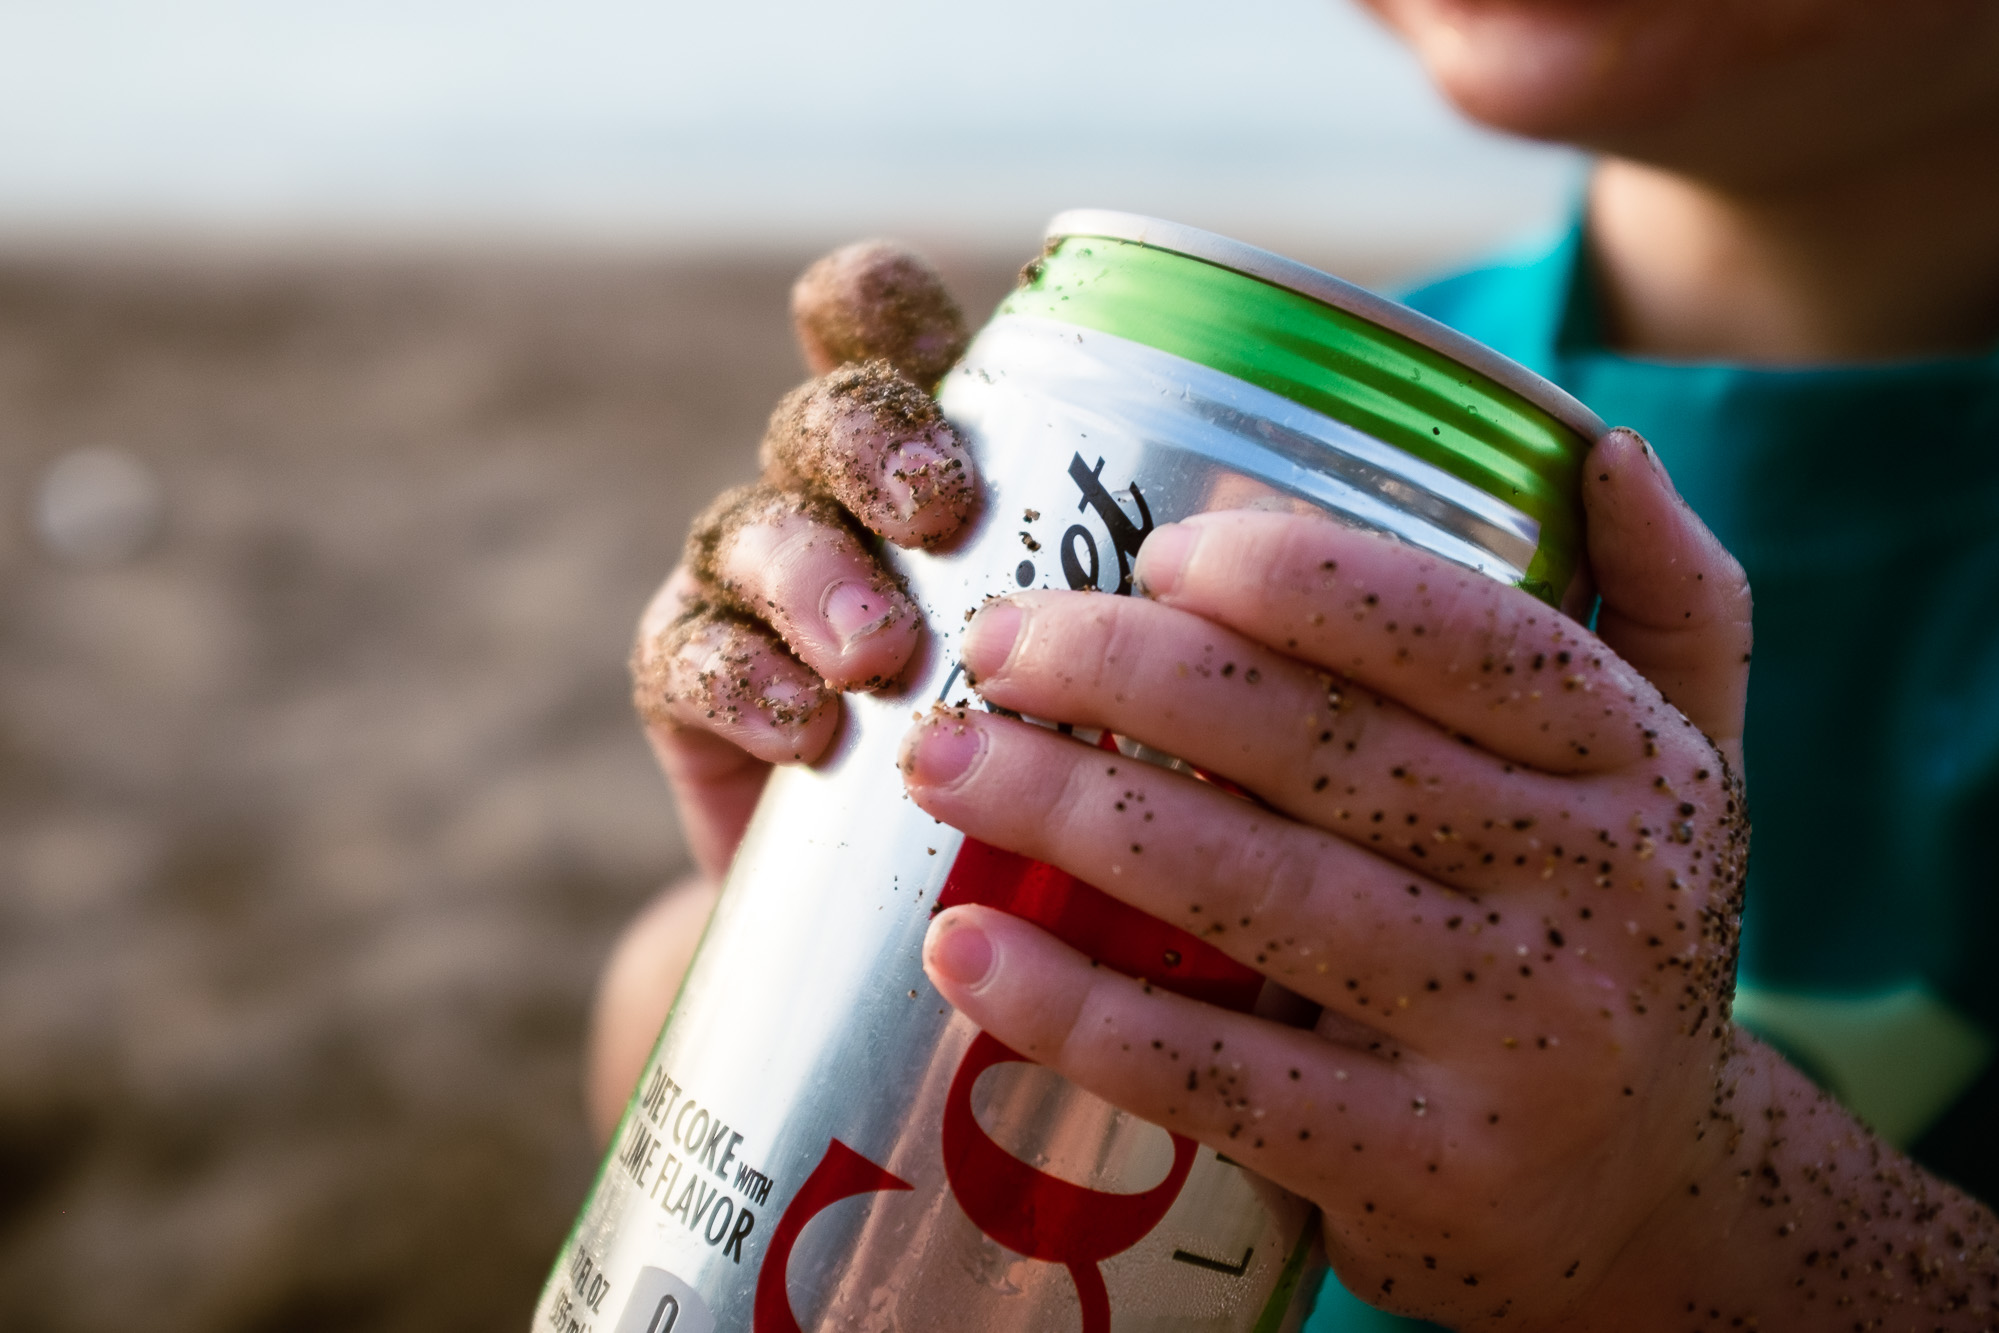 A little girl holds a can of Diet Coke while spending time at the beach